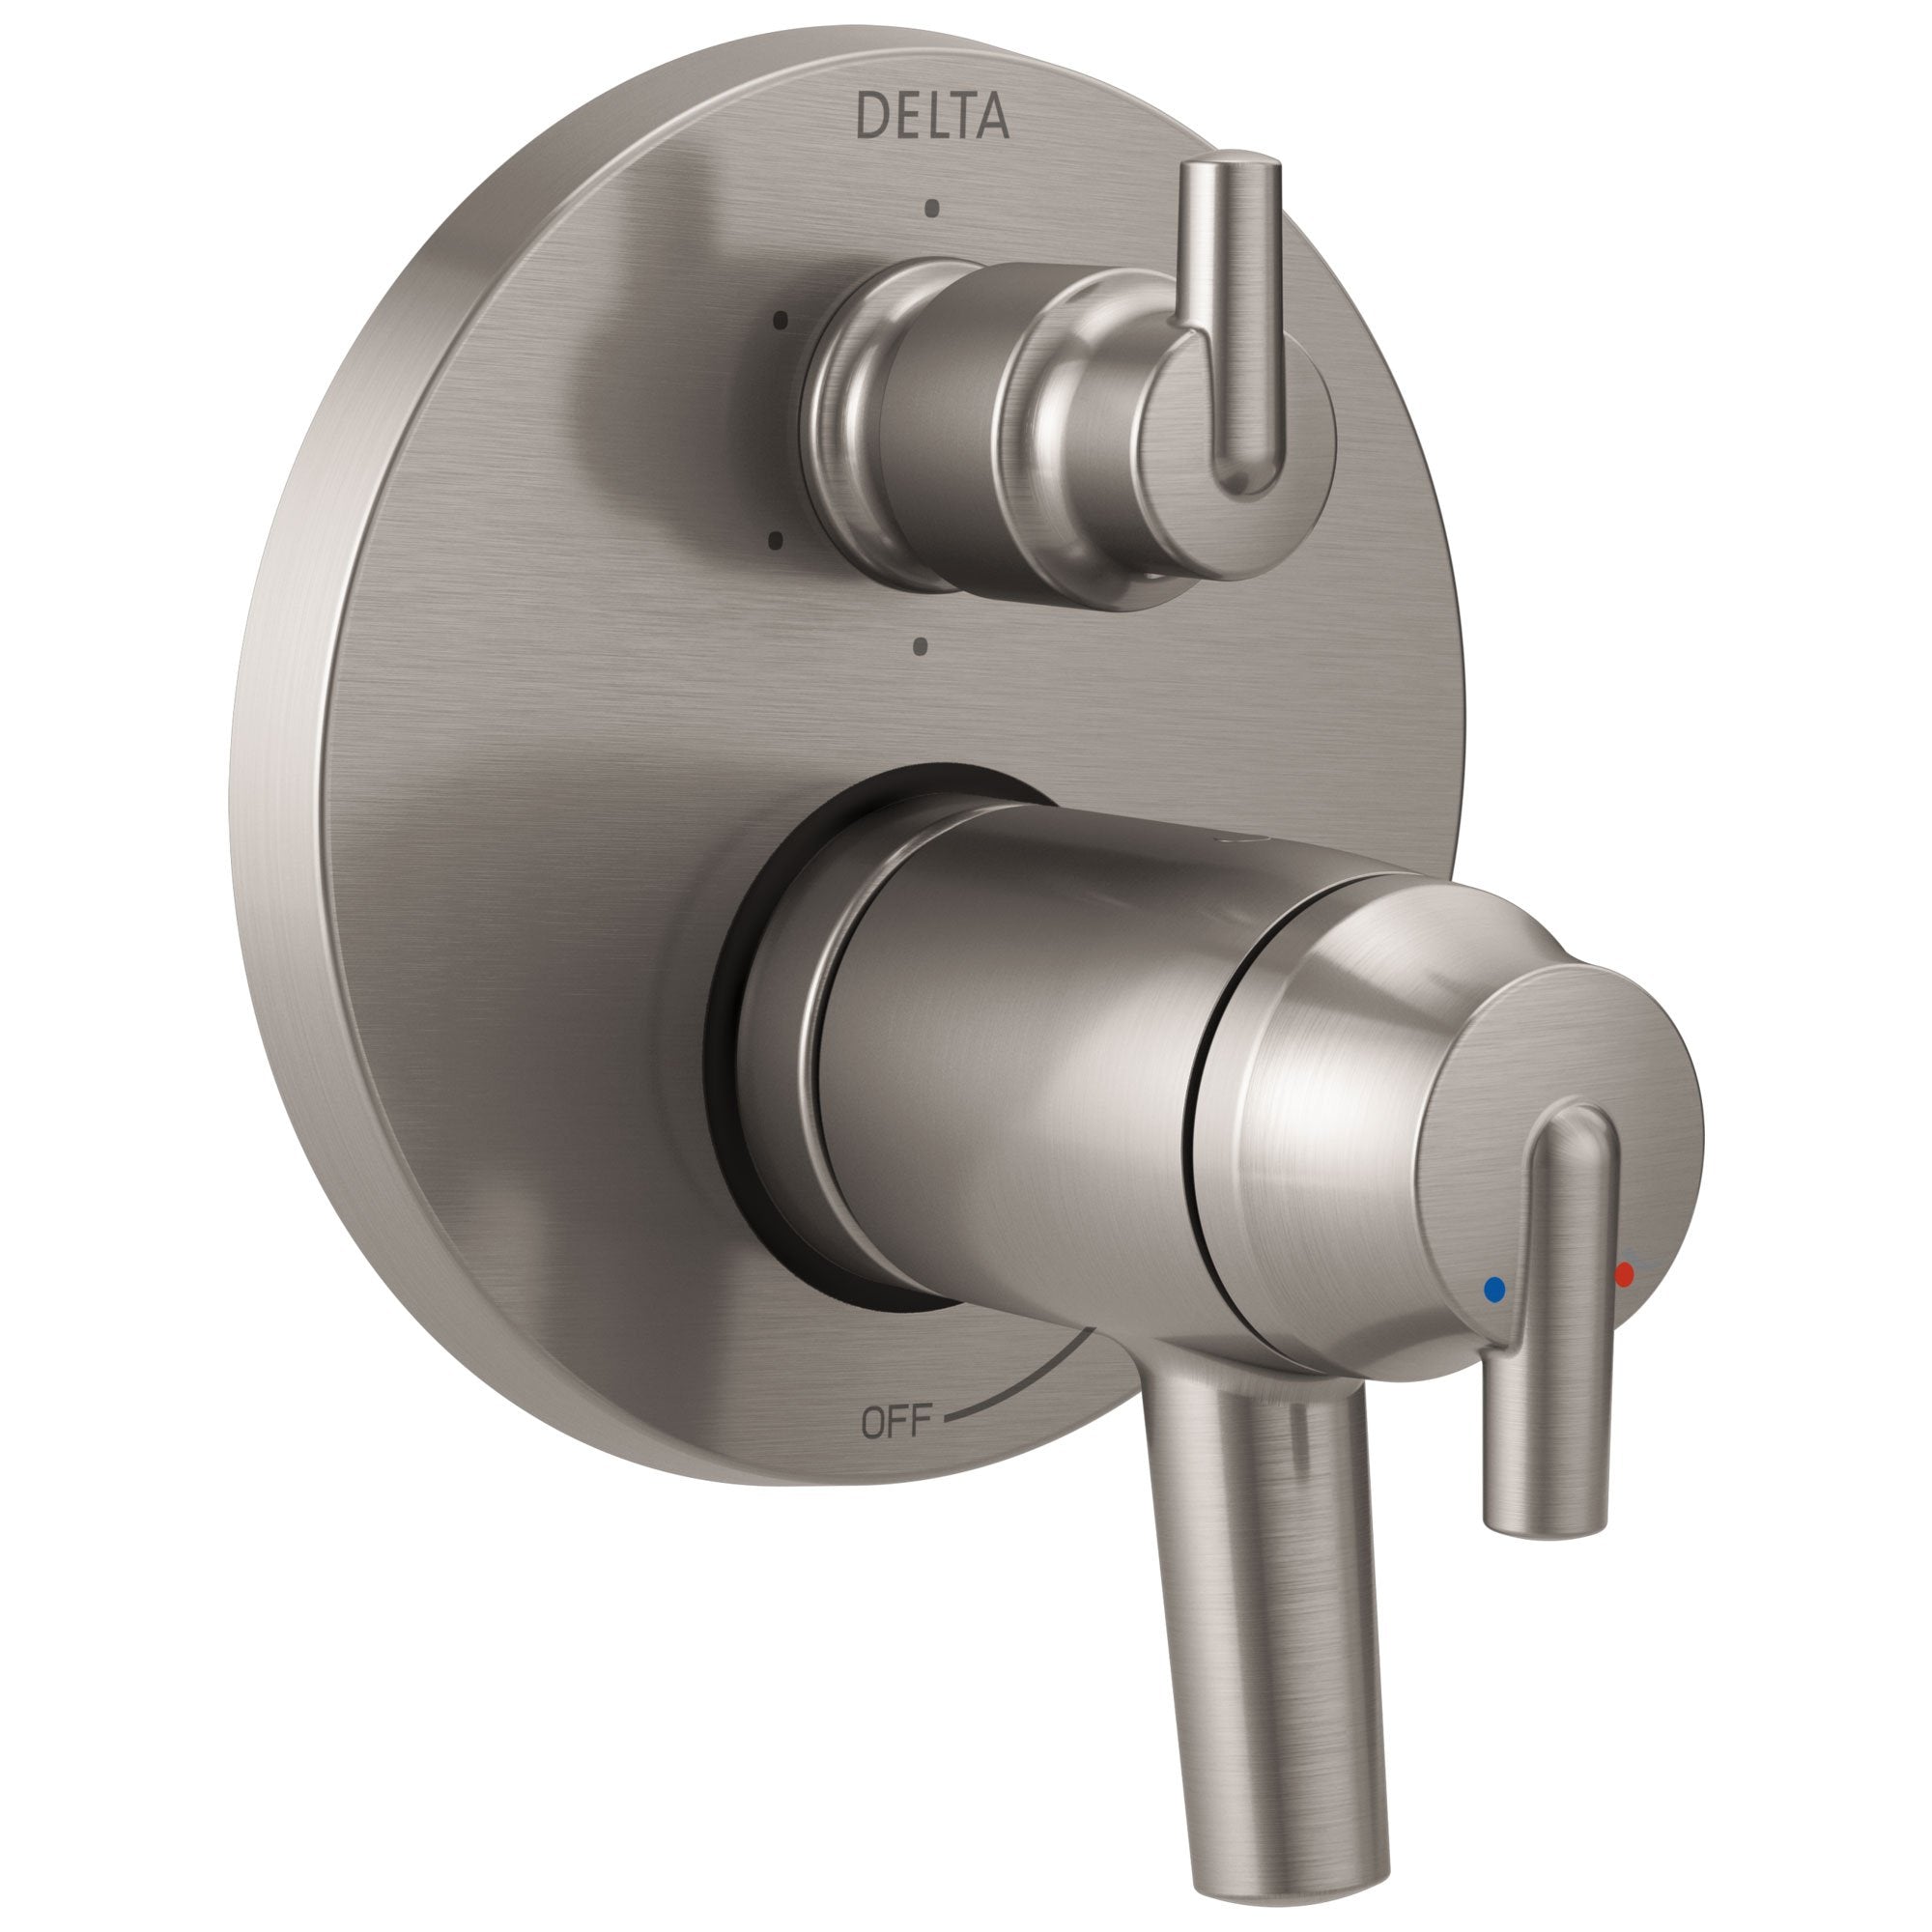 Delta Trinsic Stainless Steel Finish Thermostatic Shower Faucet Control with 6-Setting Integrated Diverter Includes Trim Kit and Valve with Stops D2119V